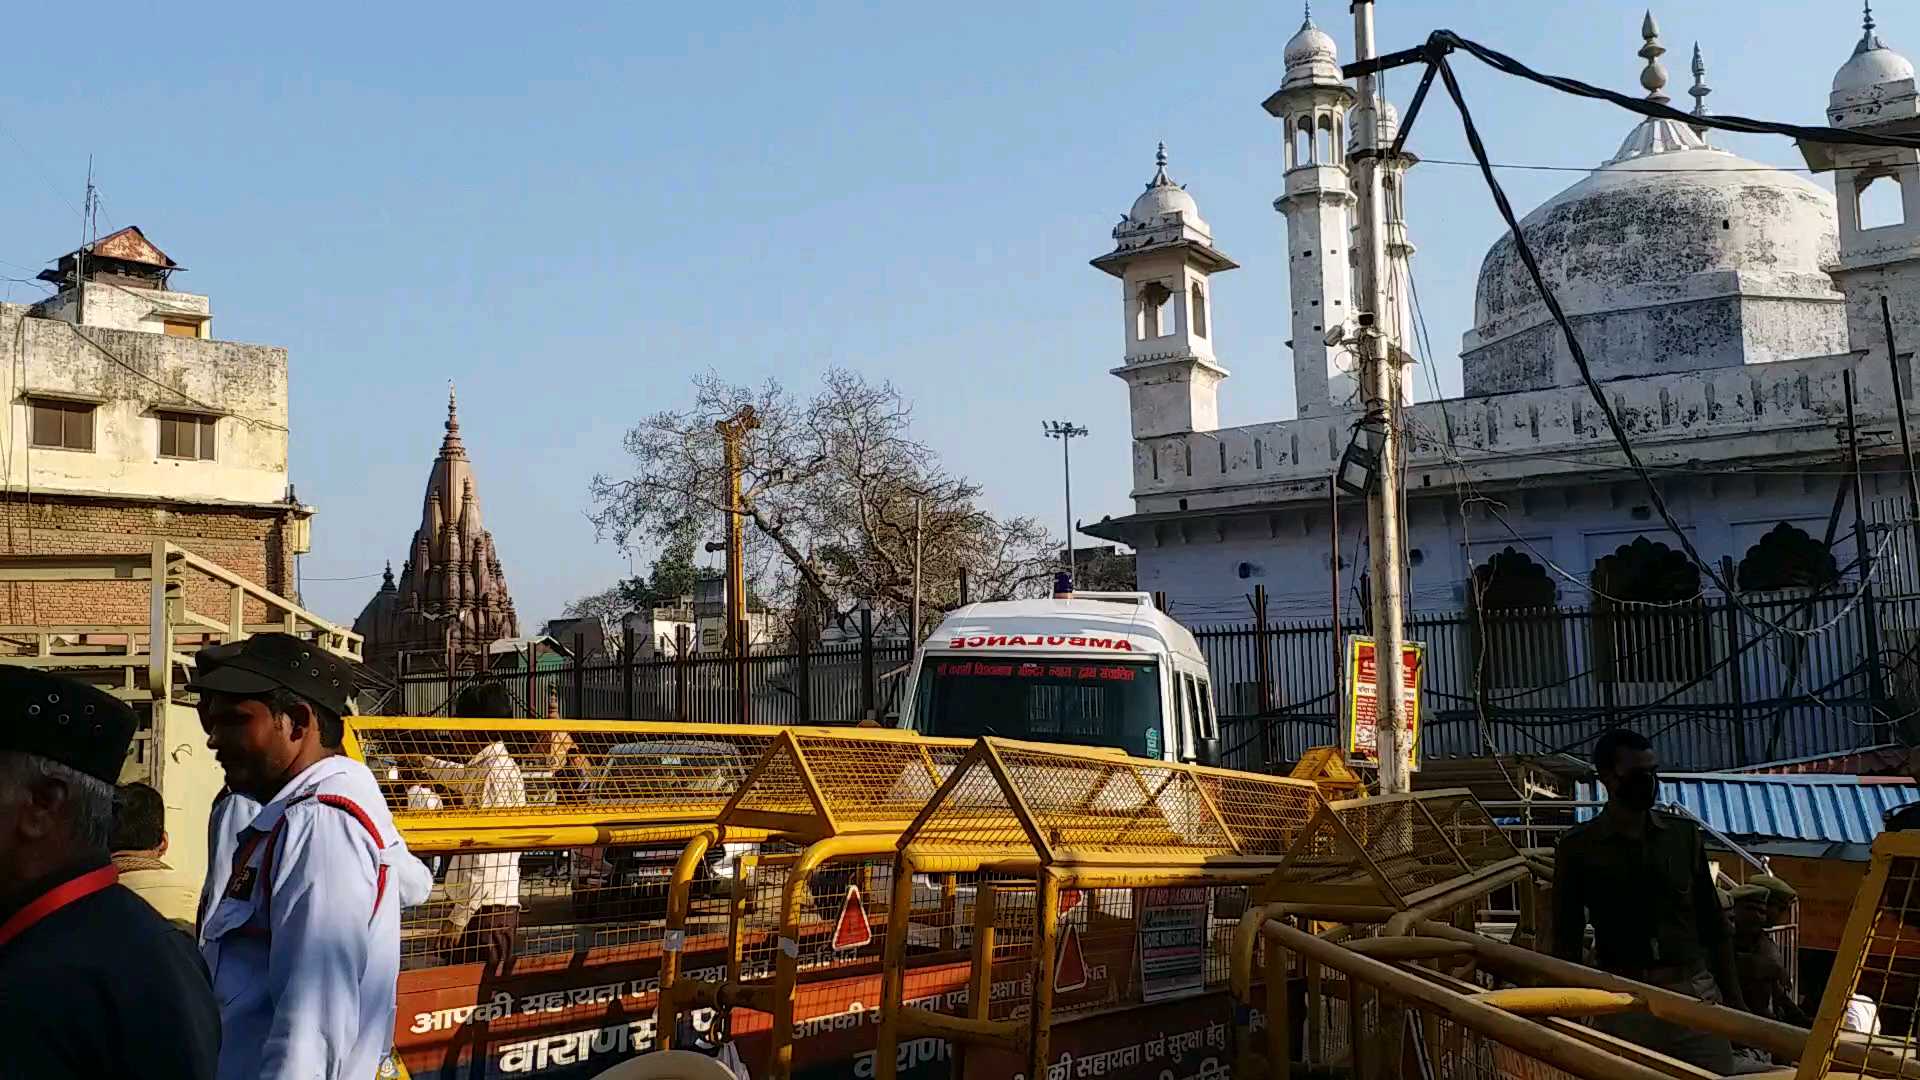 Gyanvapi Mosque Dispute: muslim petitioner happy on allahabad high court stay order